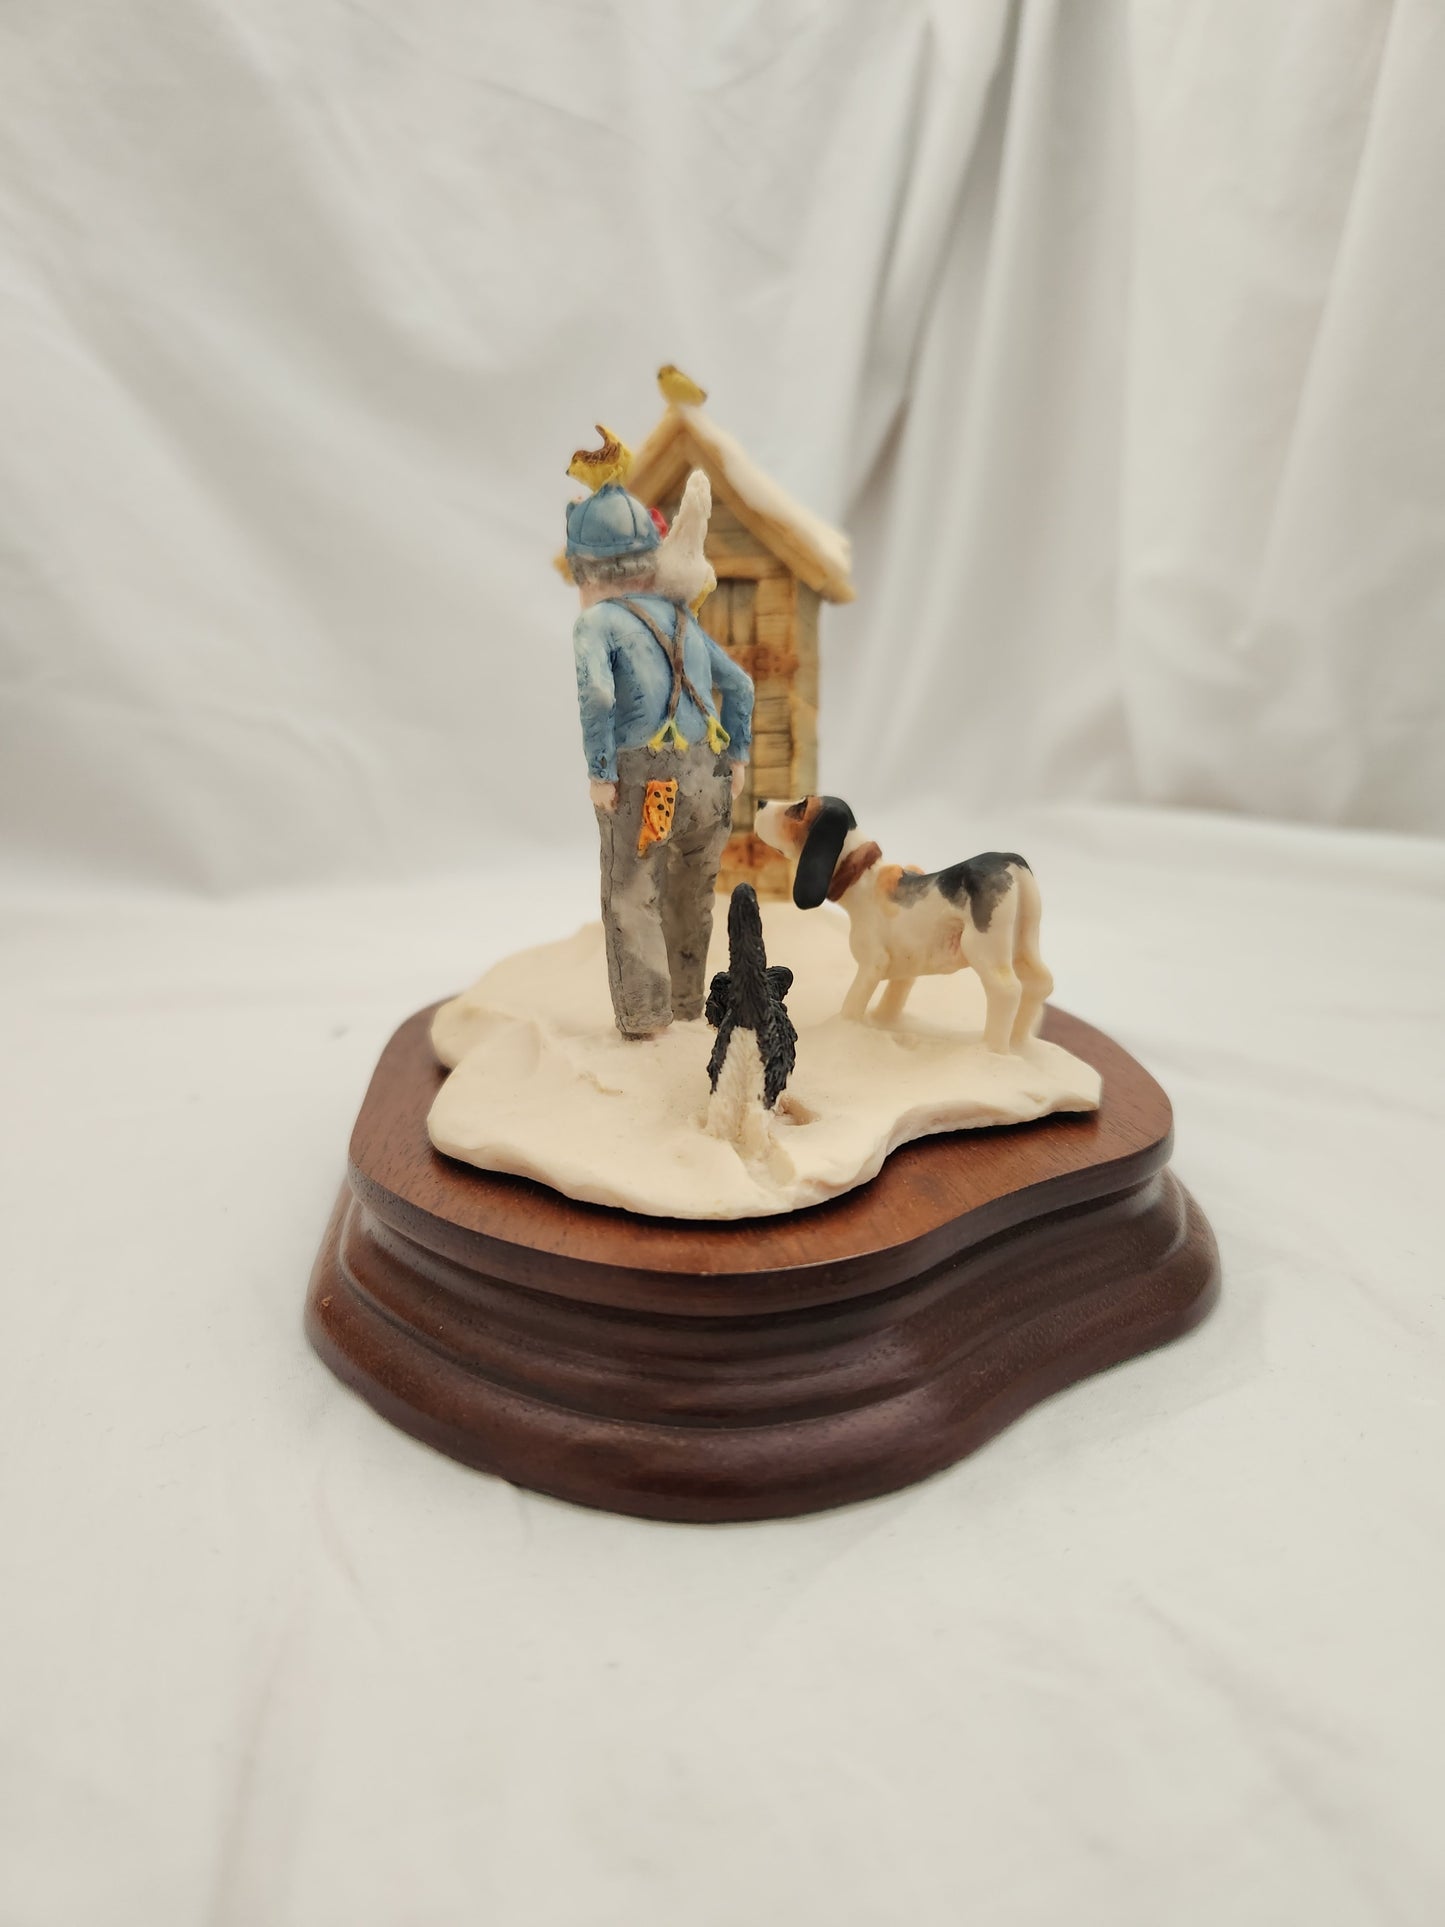 "No Private Time" Limited Edition 951/1250 Figurine by Lowell Davis - #225316